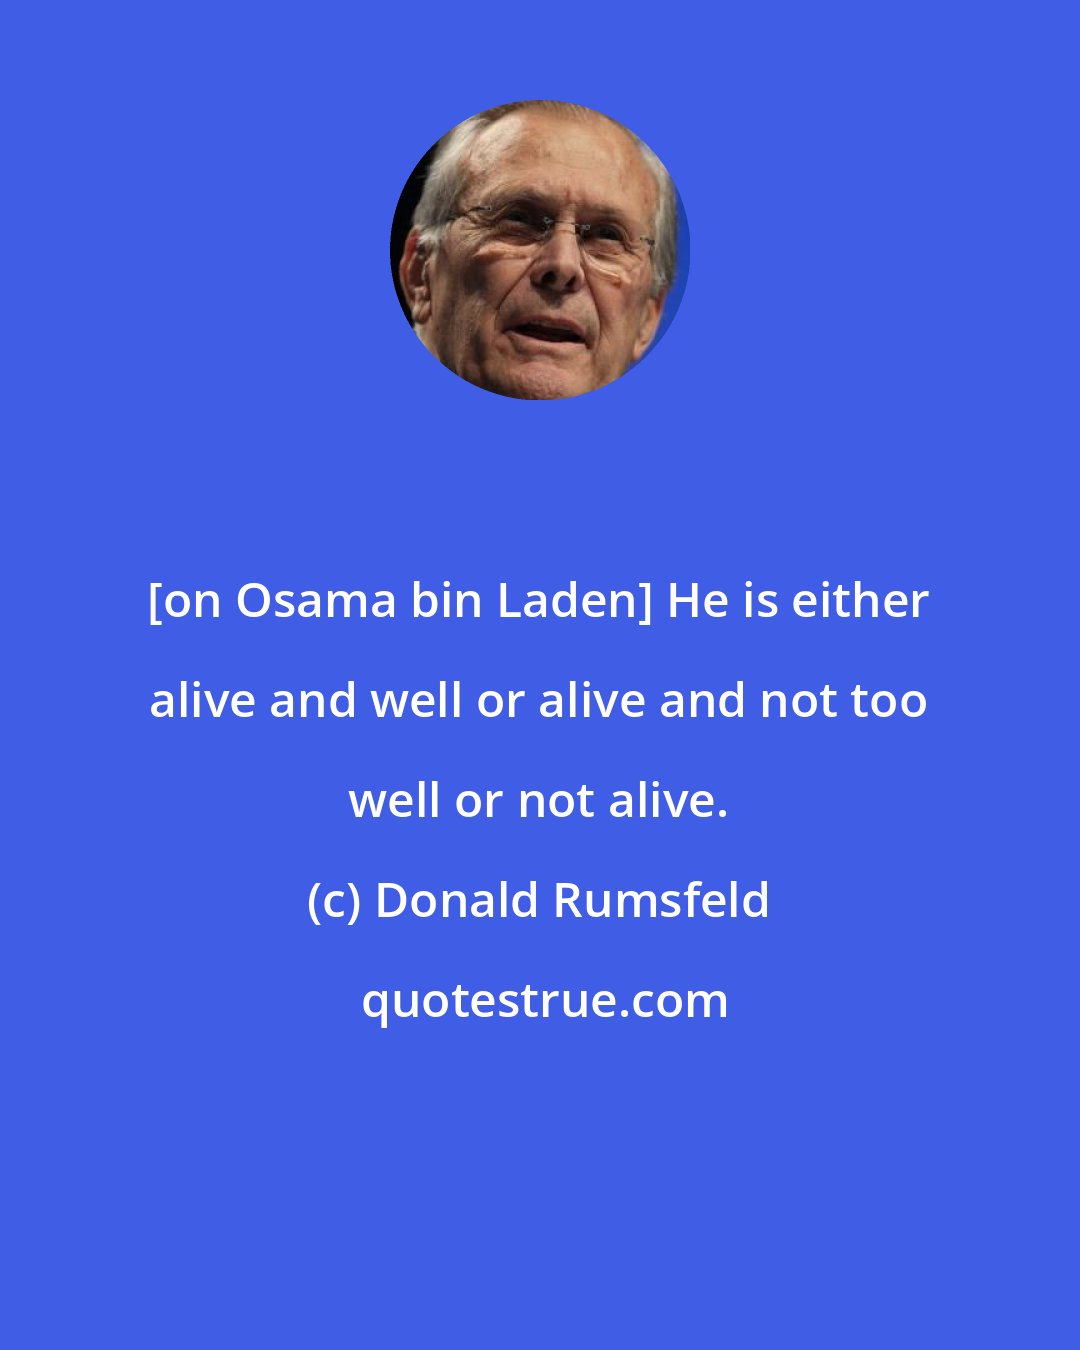 Donald Rumsfeld: [on Osama bin Laden] He is either alive and well or alive and not too well or not alive.